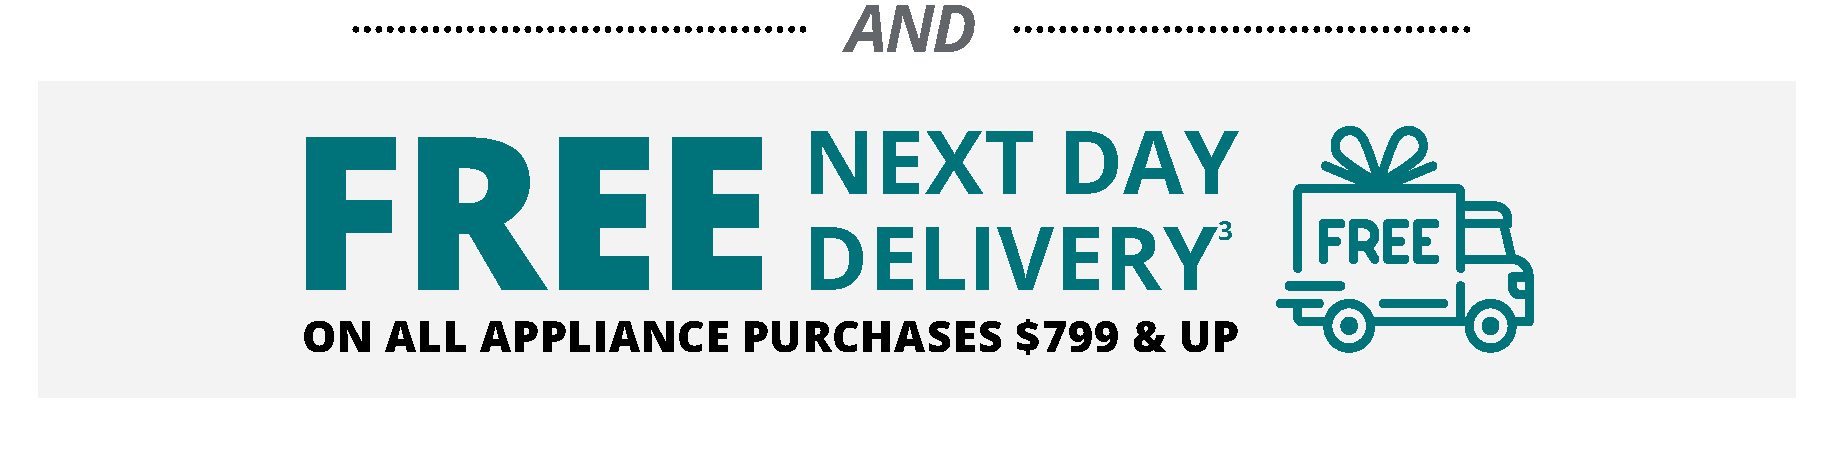 AND FREE NEXT DAY DELIVERY(3) ON ALL APPLIANCE PURCHASES $799 & UP FREE